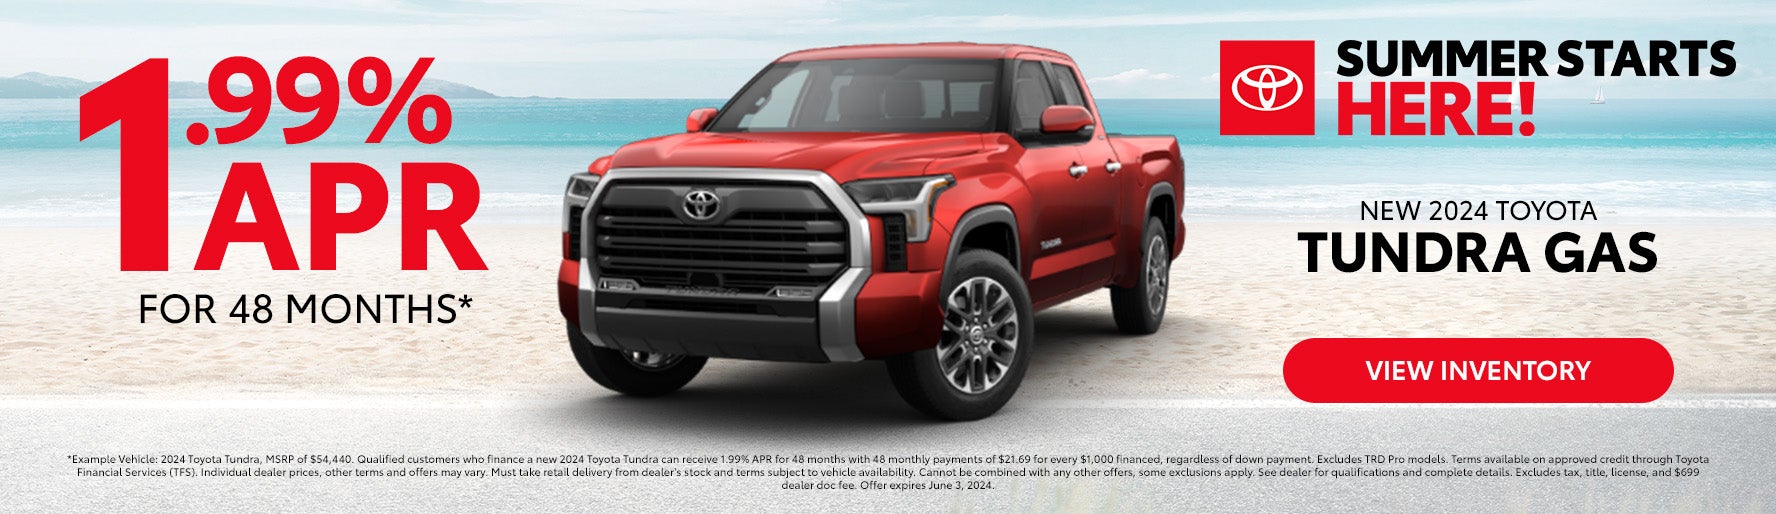 2024 Toyota Tundra Gas 1.99% APR for 48 months